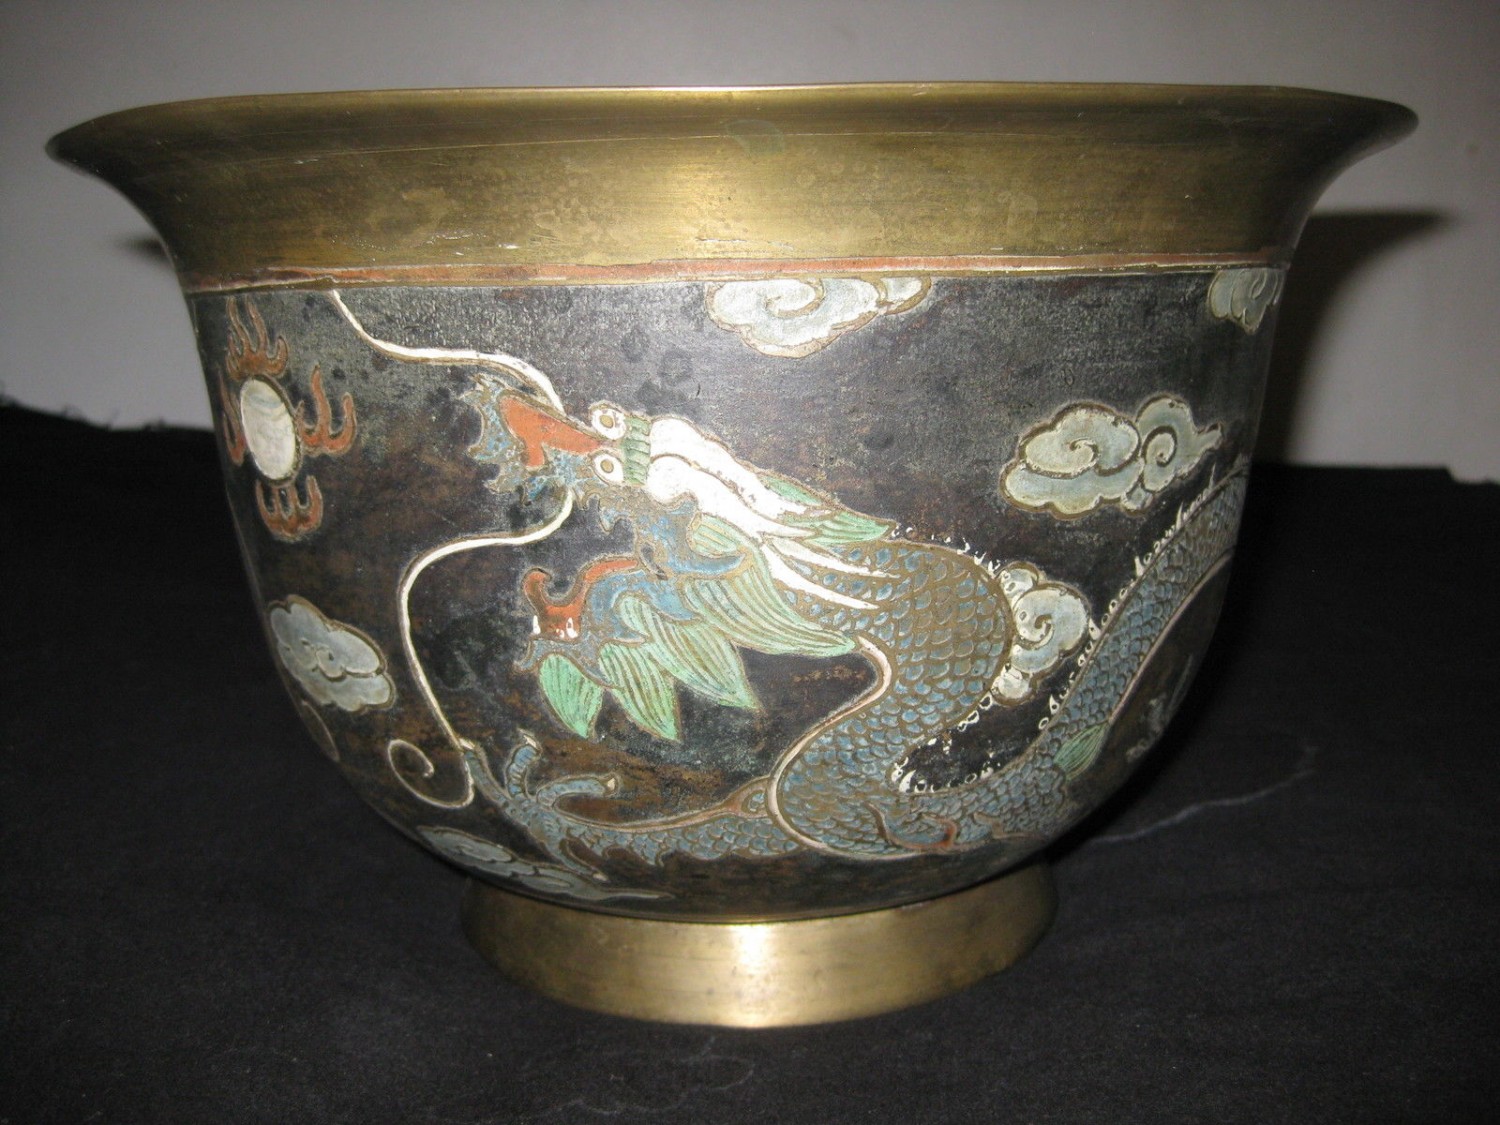 ANTIQUE CHINESE BRONZE BIG BOWL HAND PAINTED MING DYNASTY MARK